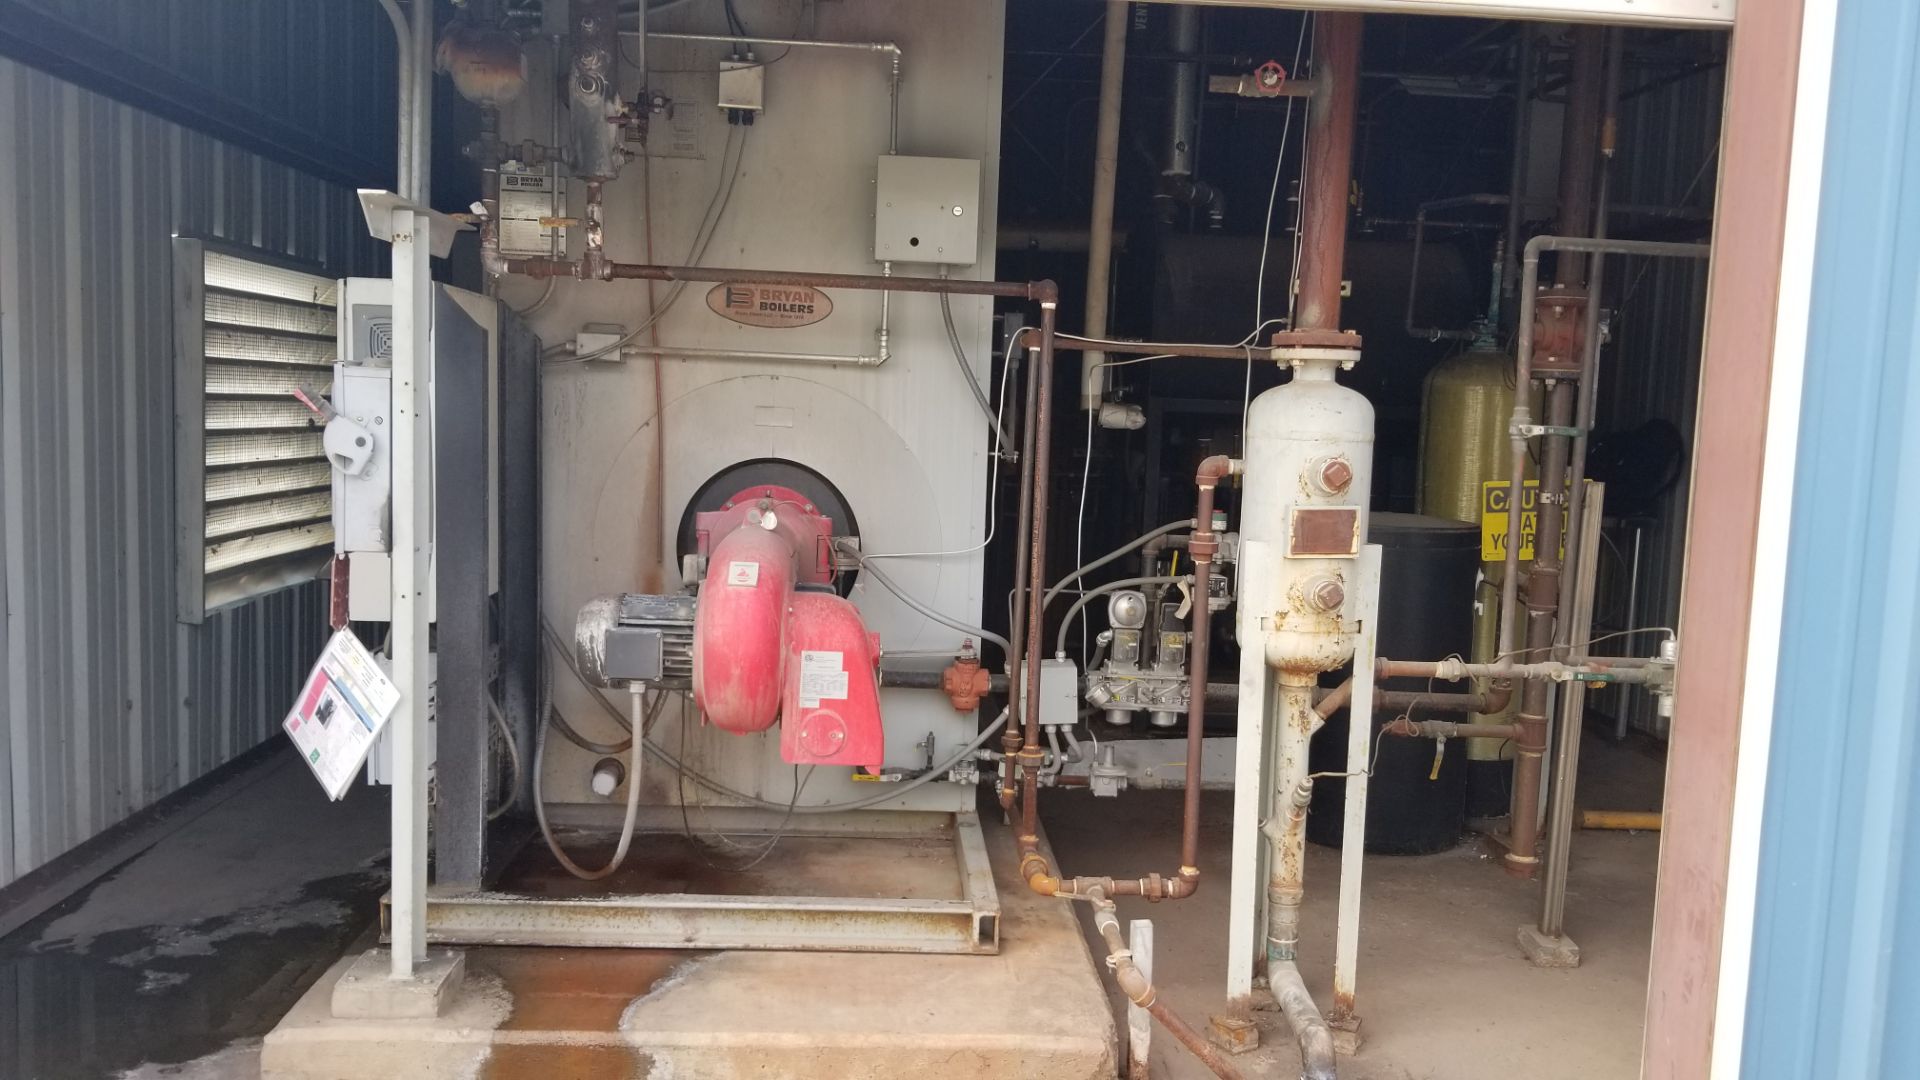 2008 Bryan Boiler System, Model RV350-S-150-FD0-LX, S/N 96994, Natural Gas, 3500 MBH Output with